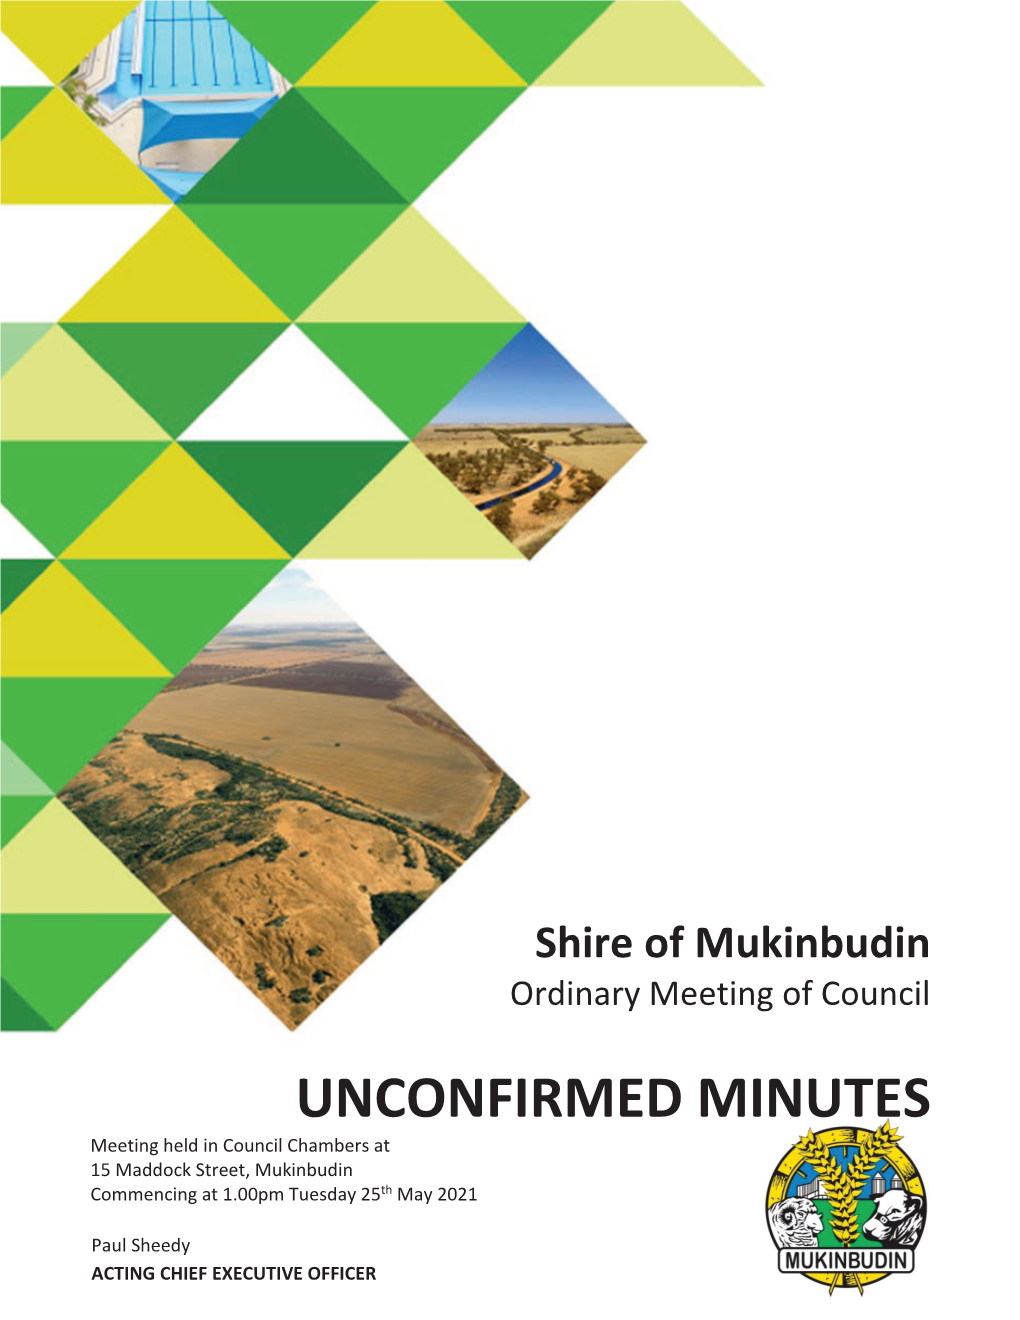 UNCONFIRMED MINUTES Meeting Held in Council Chambers at 15 Maddock Street, Mukinbudin Commencing at 1.00Pm Tuesday 25Th May 2021